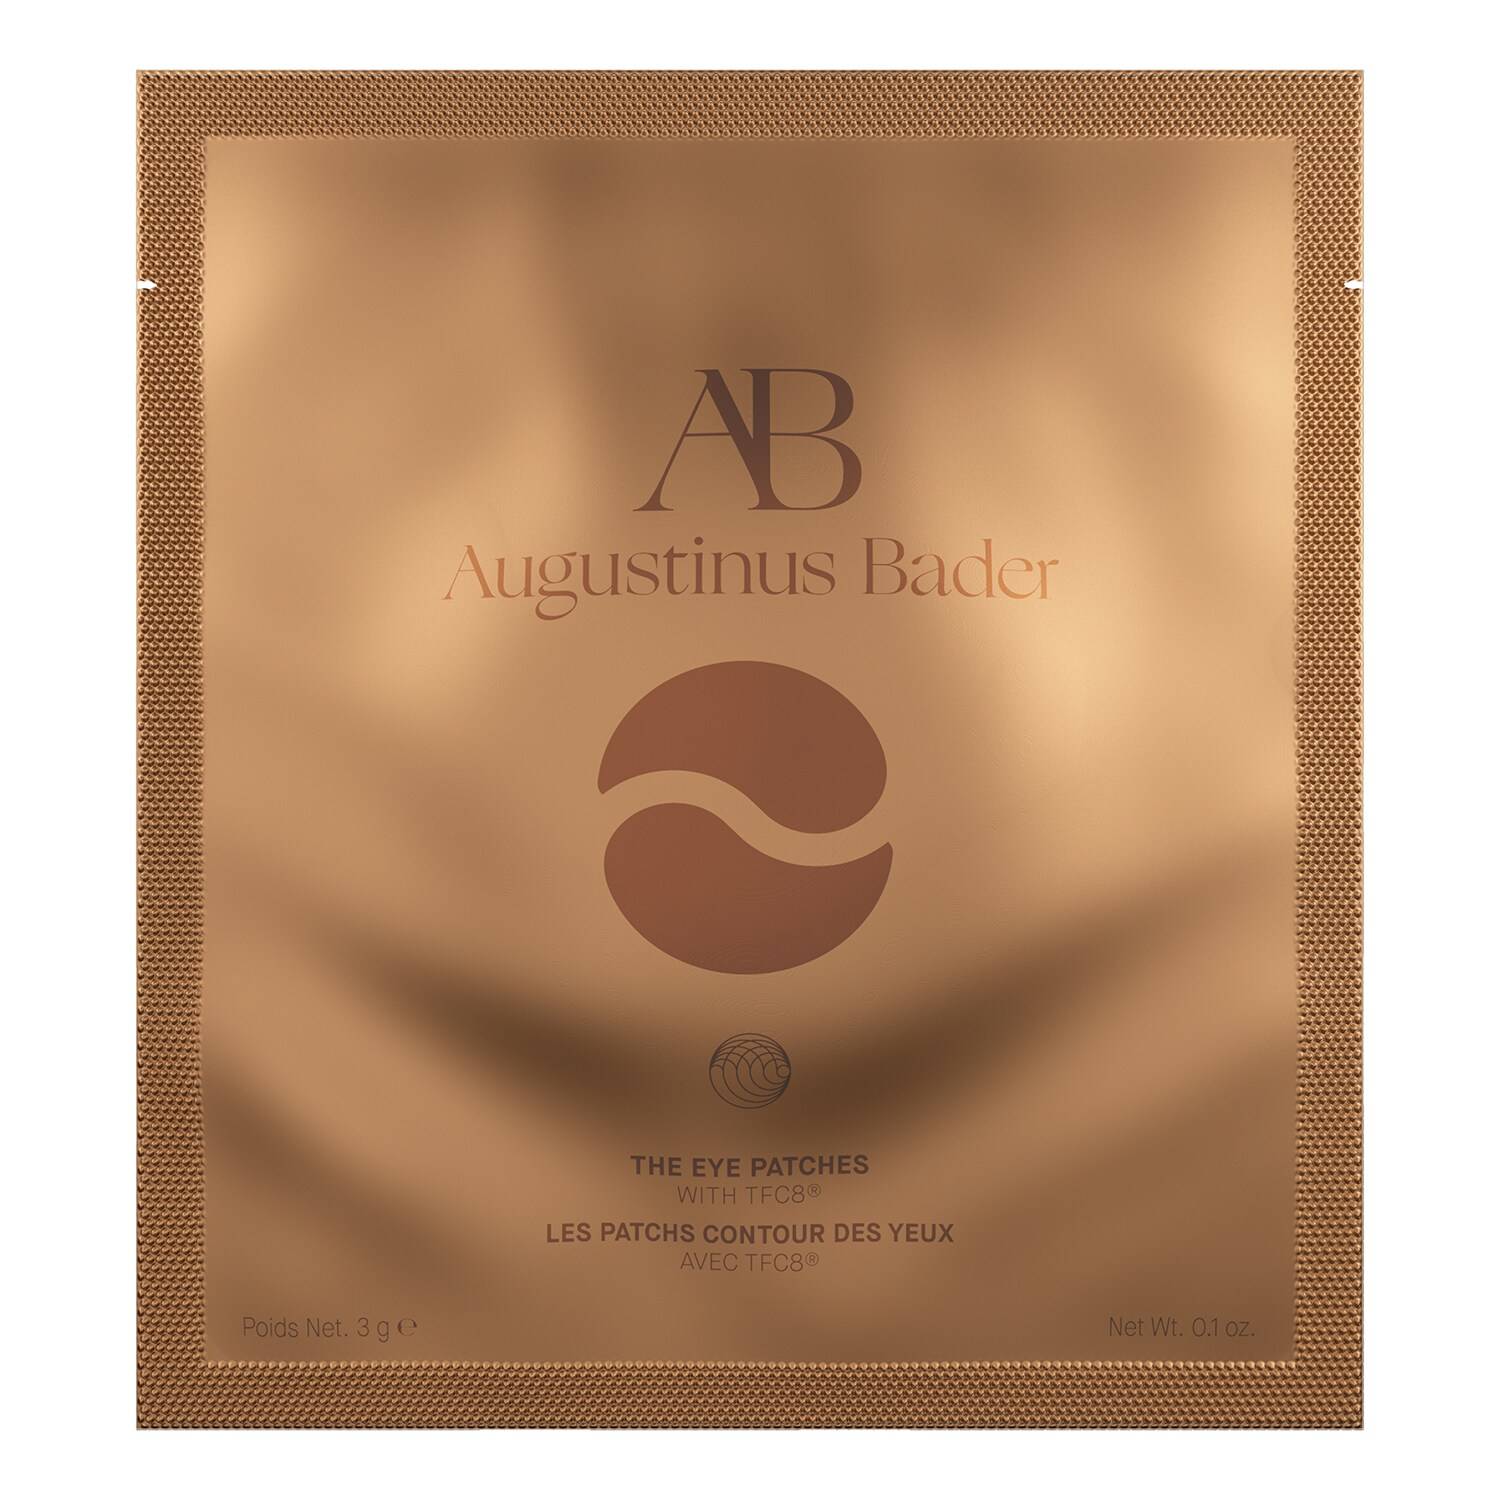 Augustinus Bader The Eye Patches 1 - Single Sachet